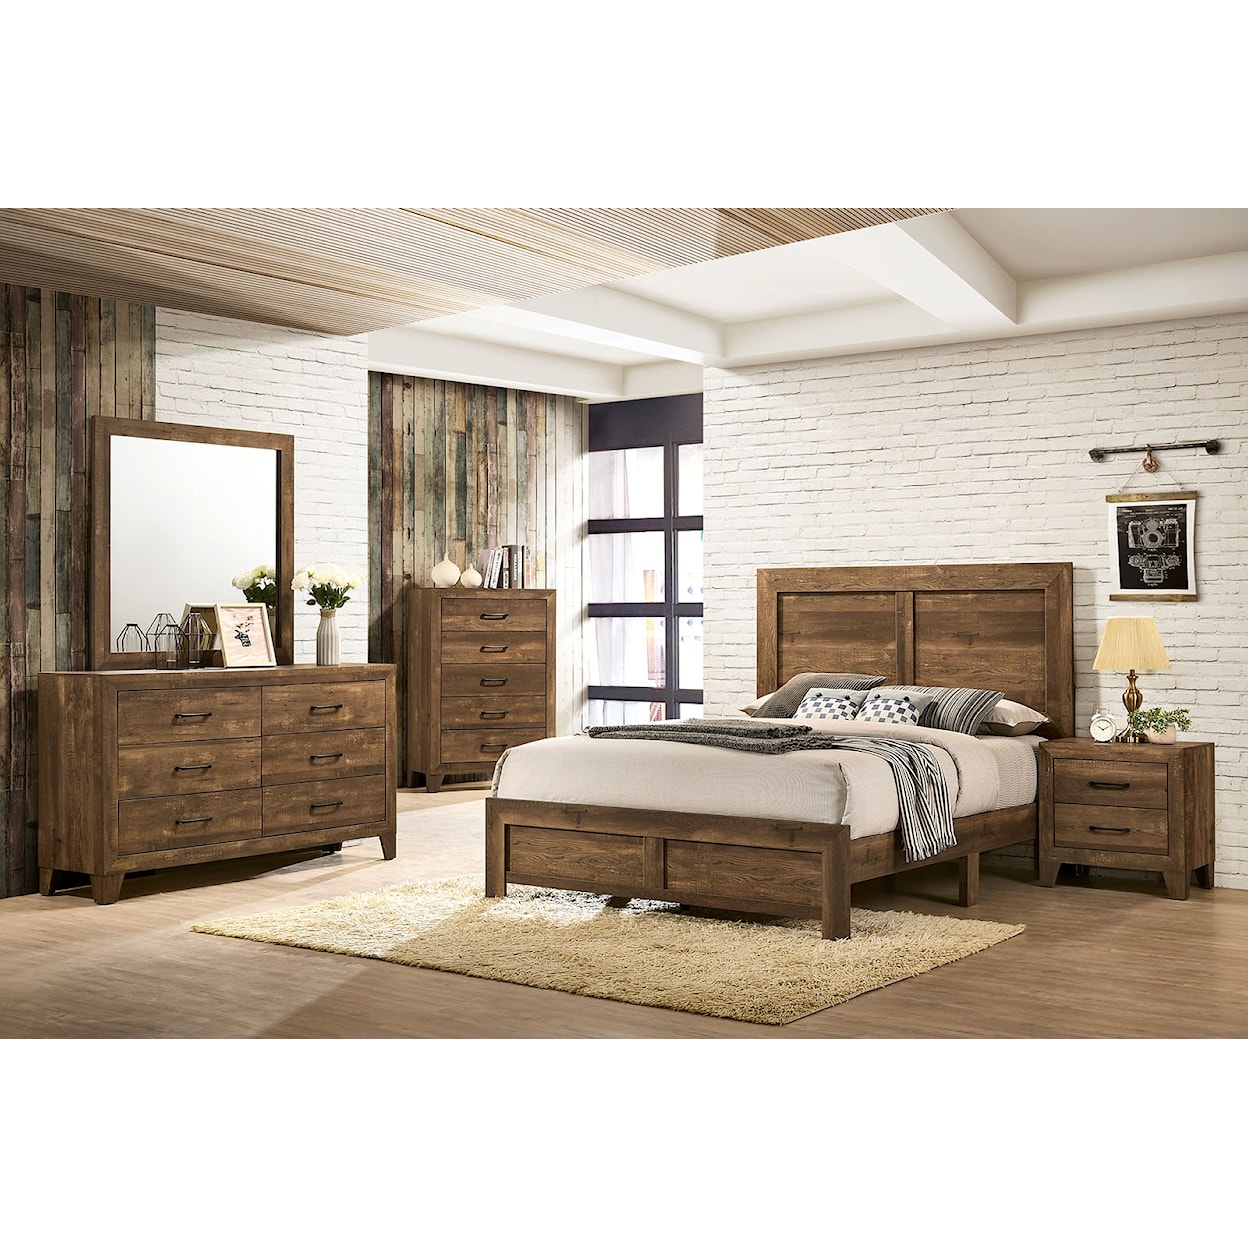 Furniture of America - FOA Wentworth Queen Bedroom Group 